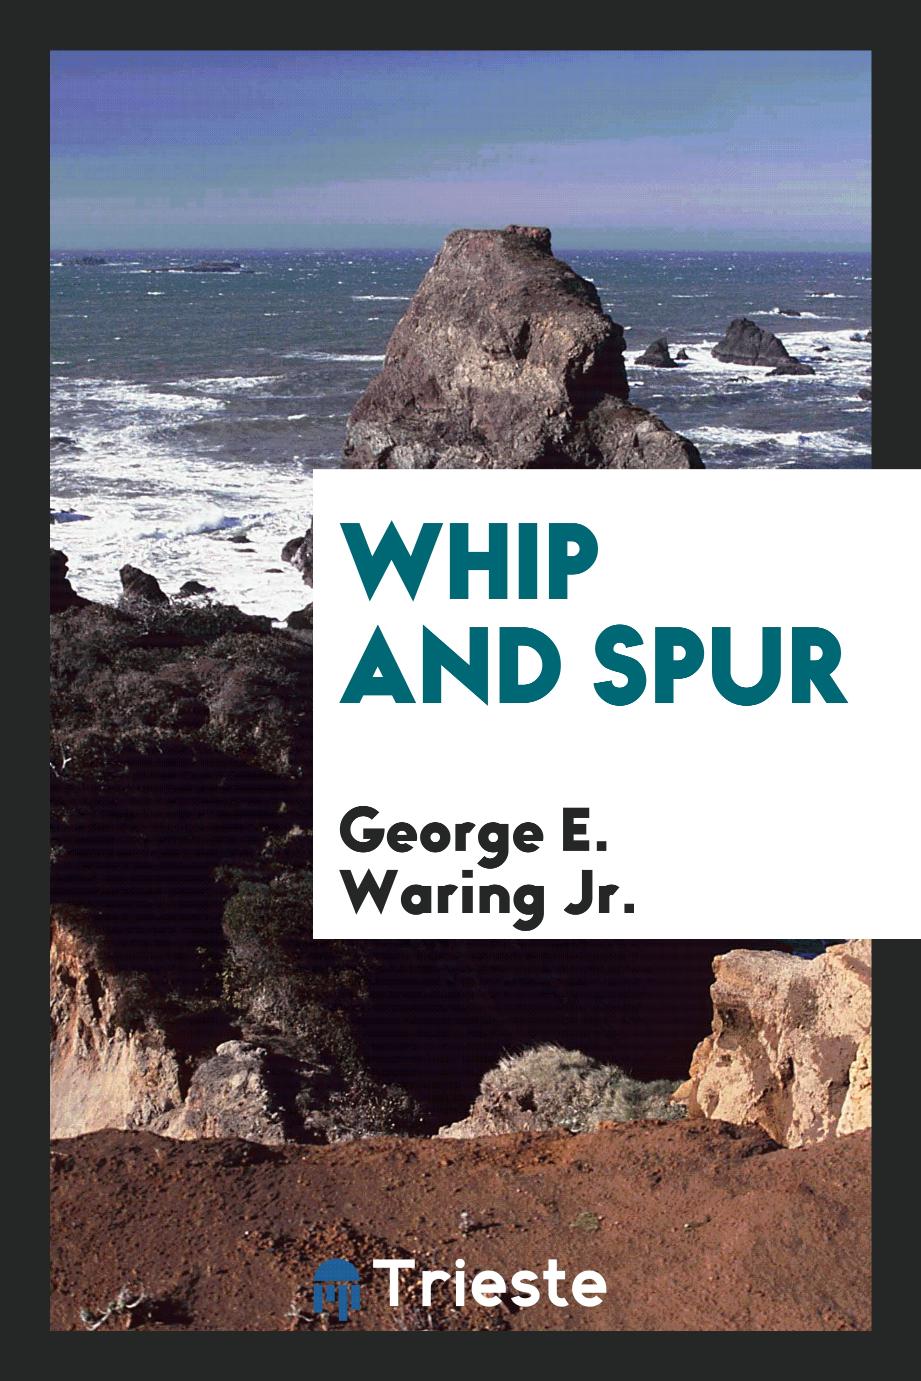 Whip and spur